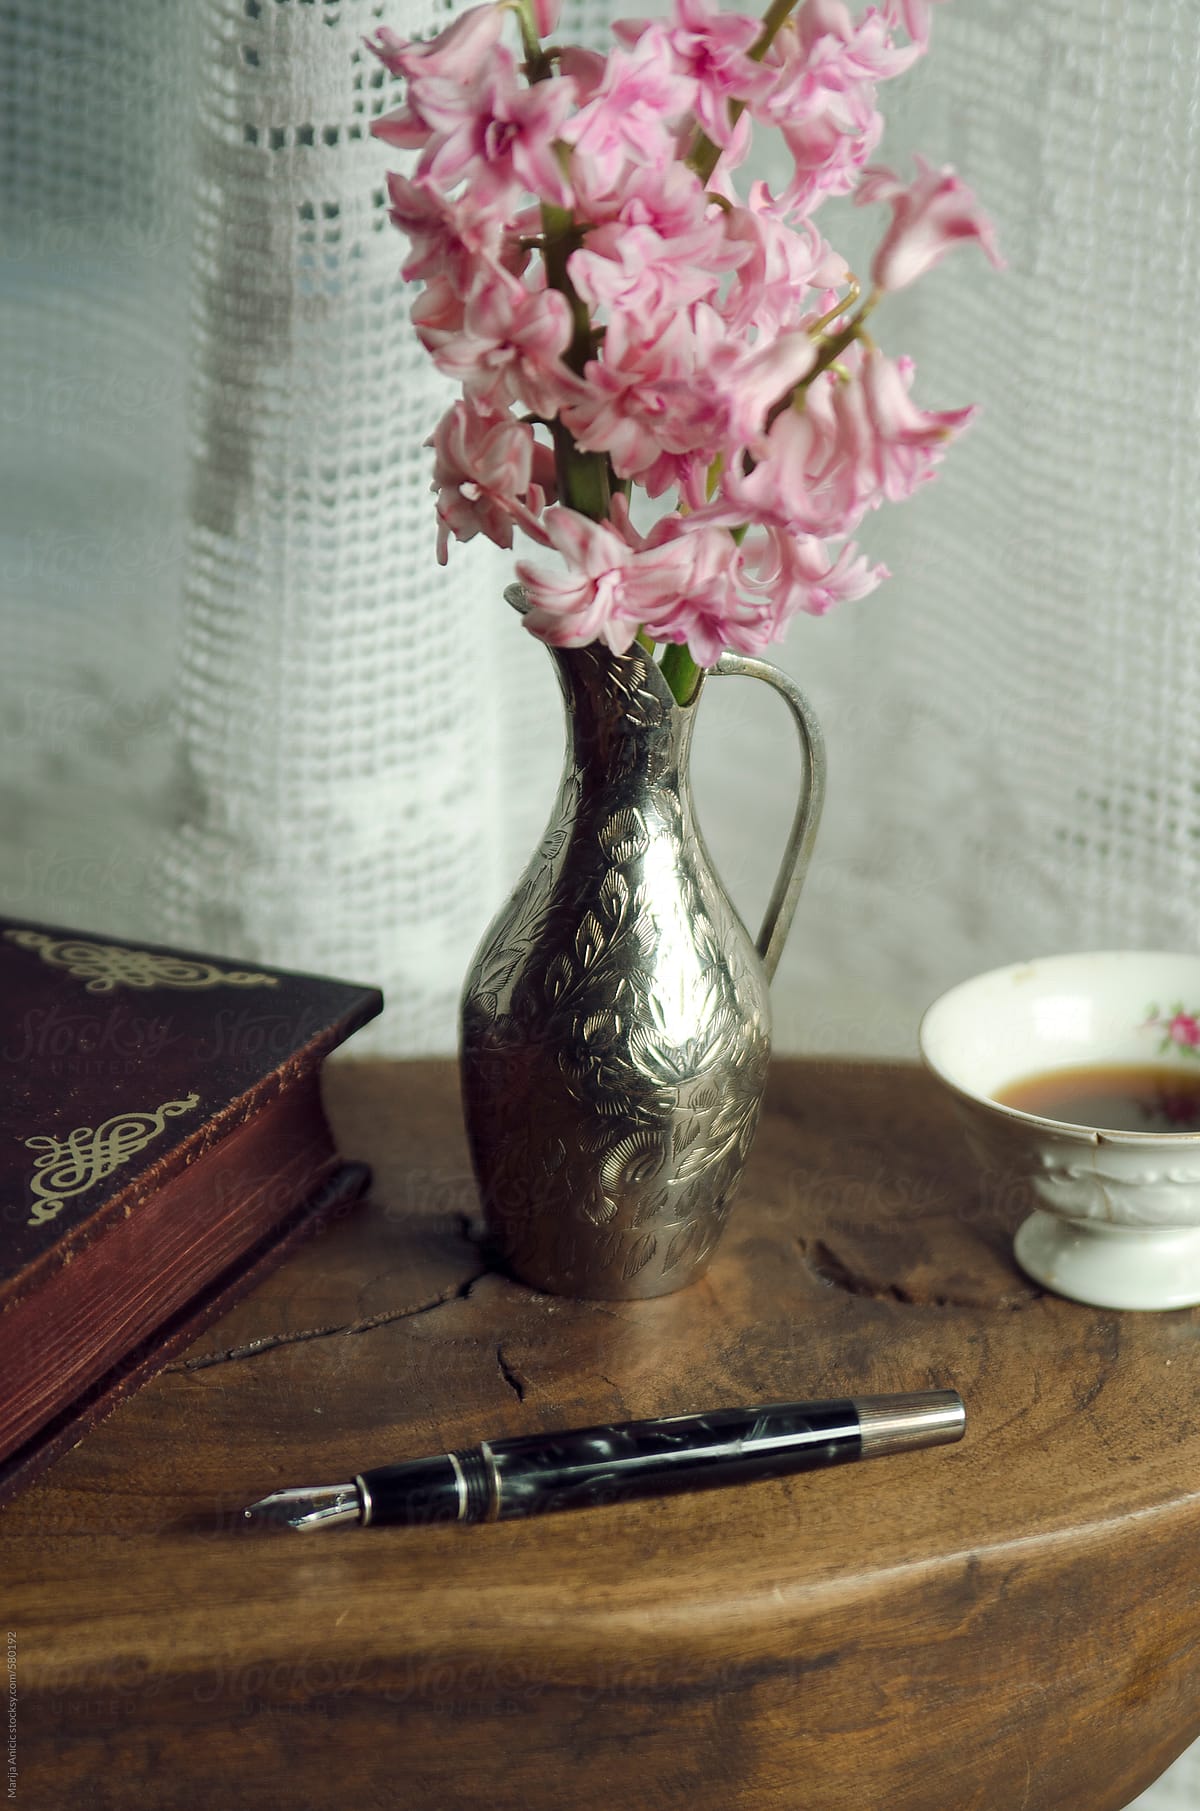 Silver vase with pink flowers,cup of coffee,notebook and pen